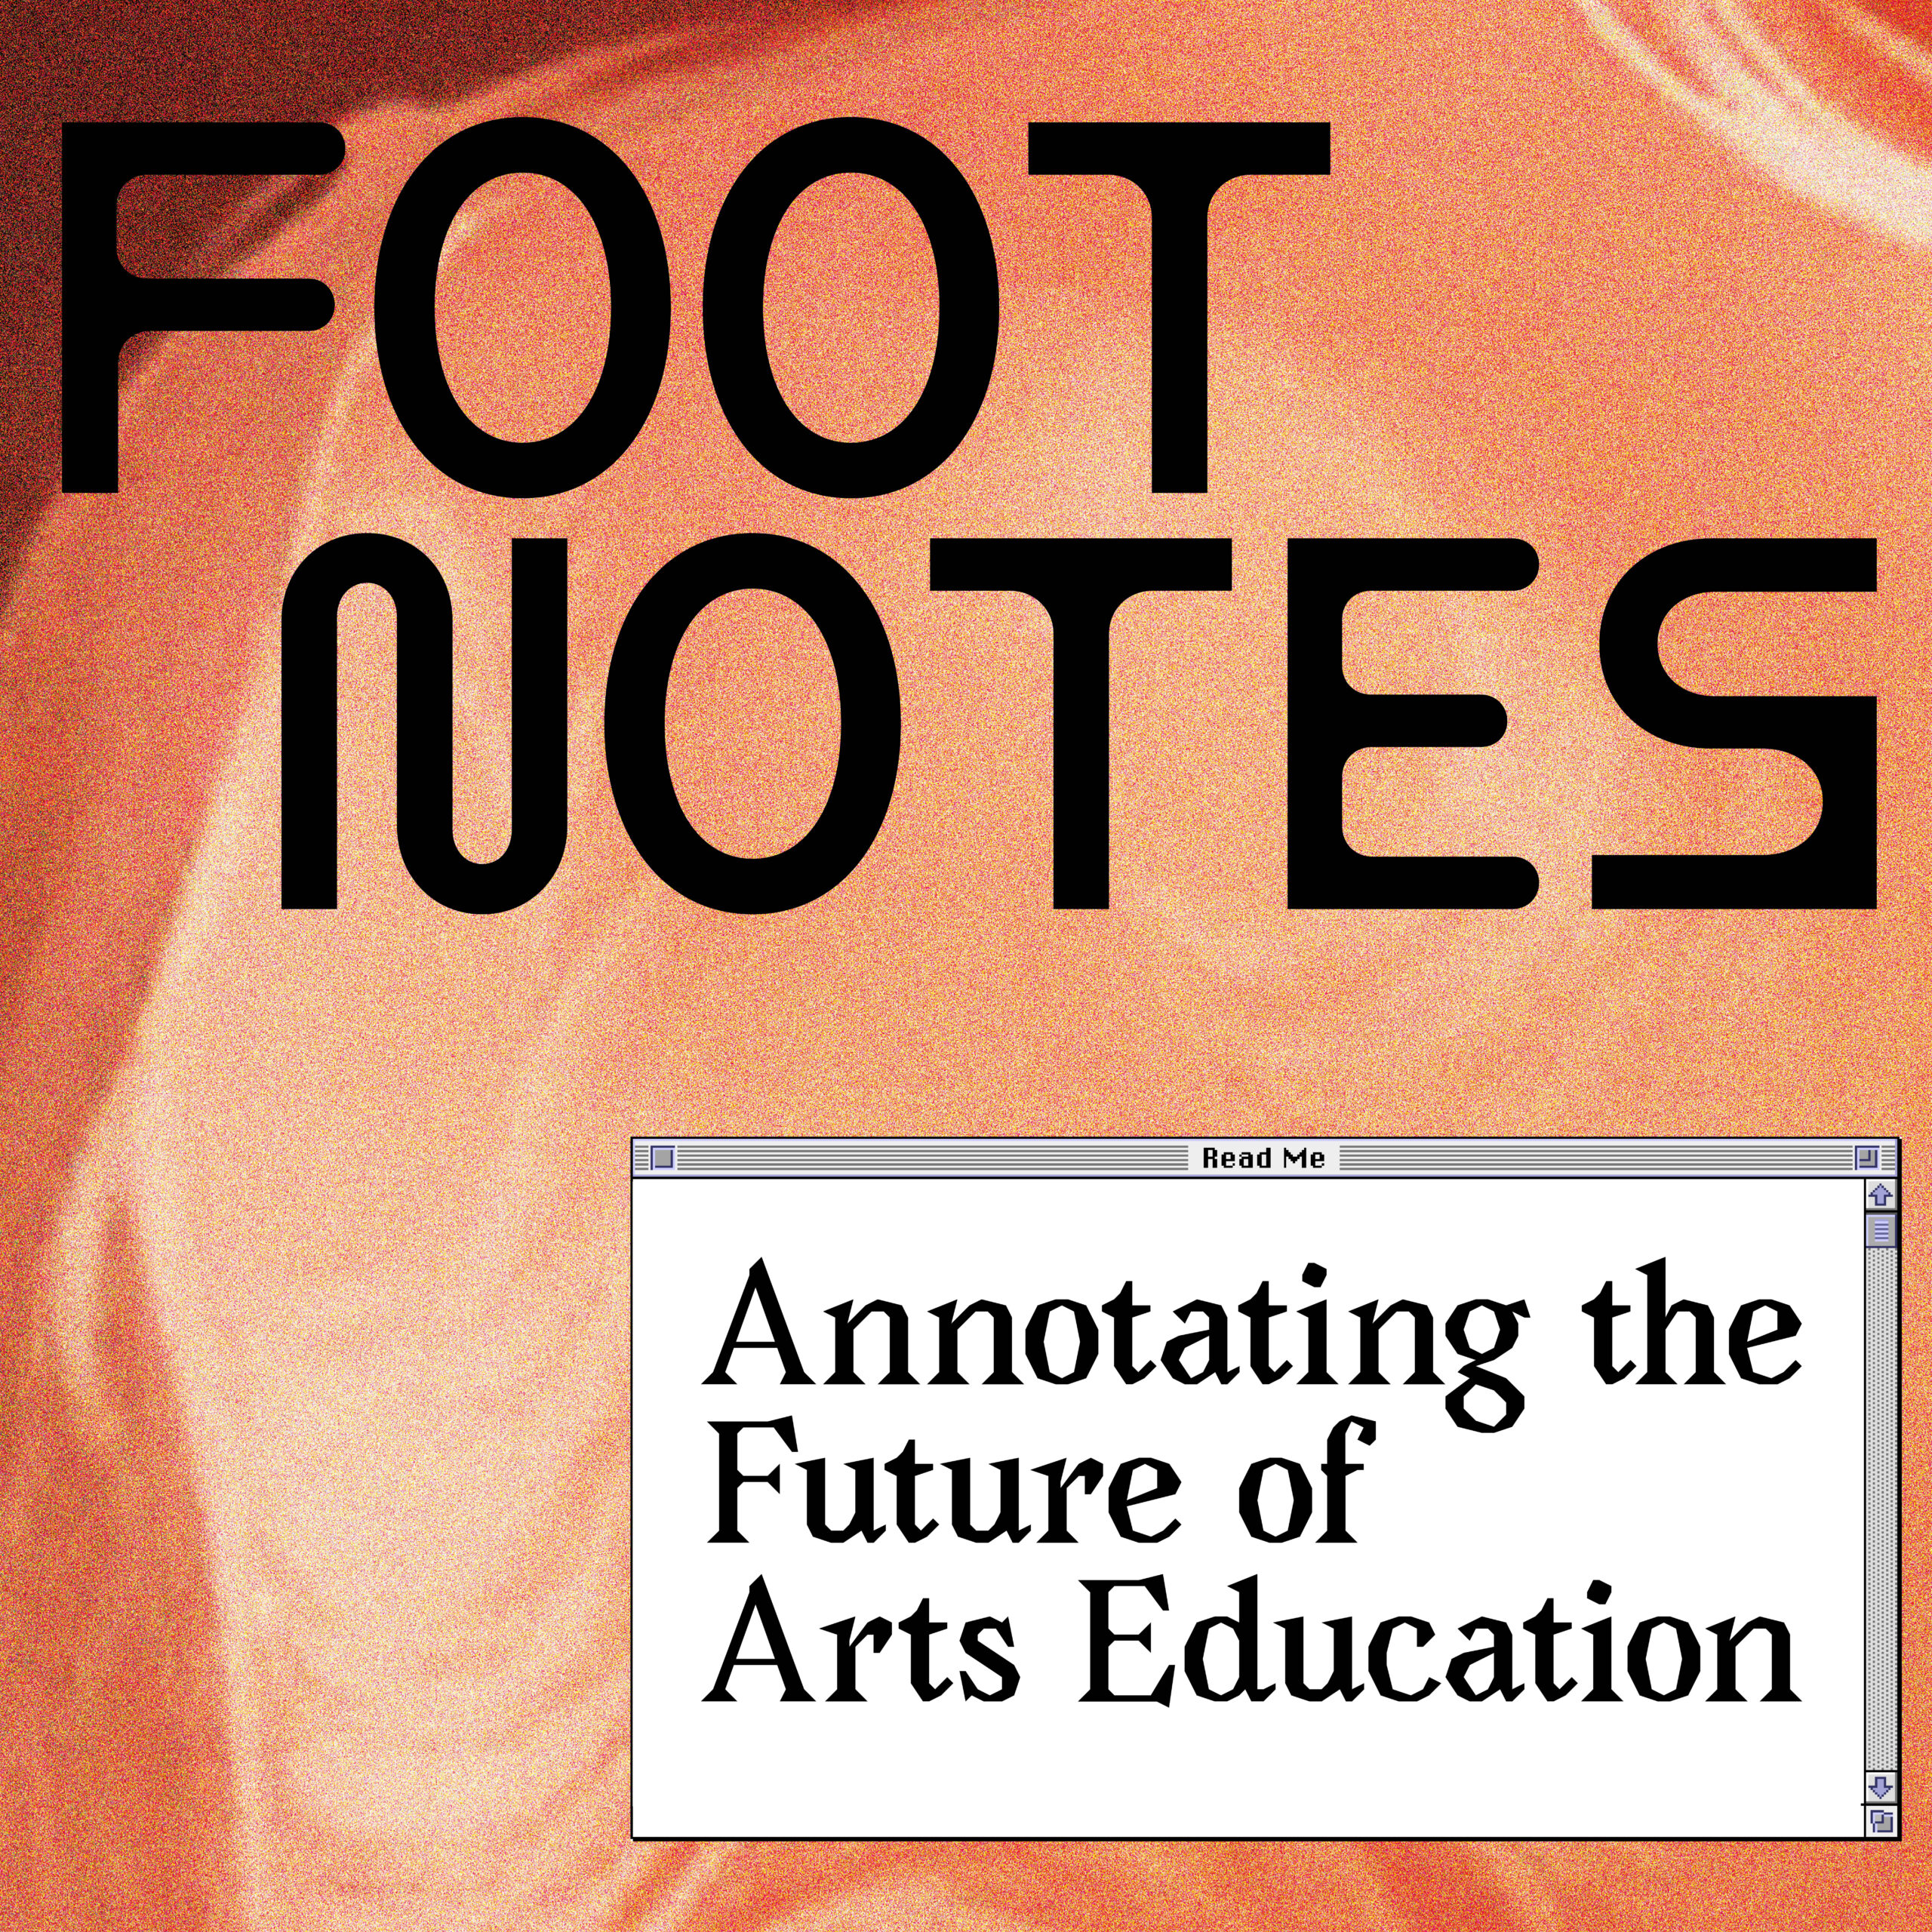 Footnotes: Annotating the Future of Arts Education